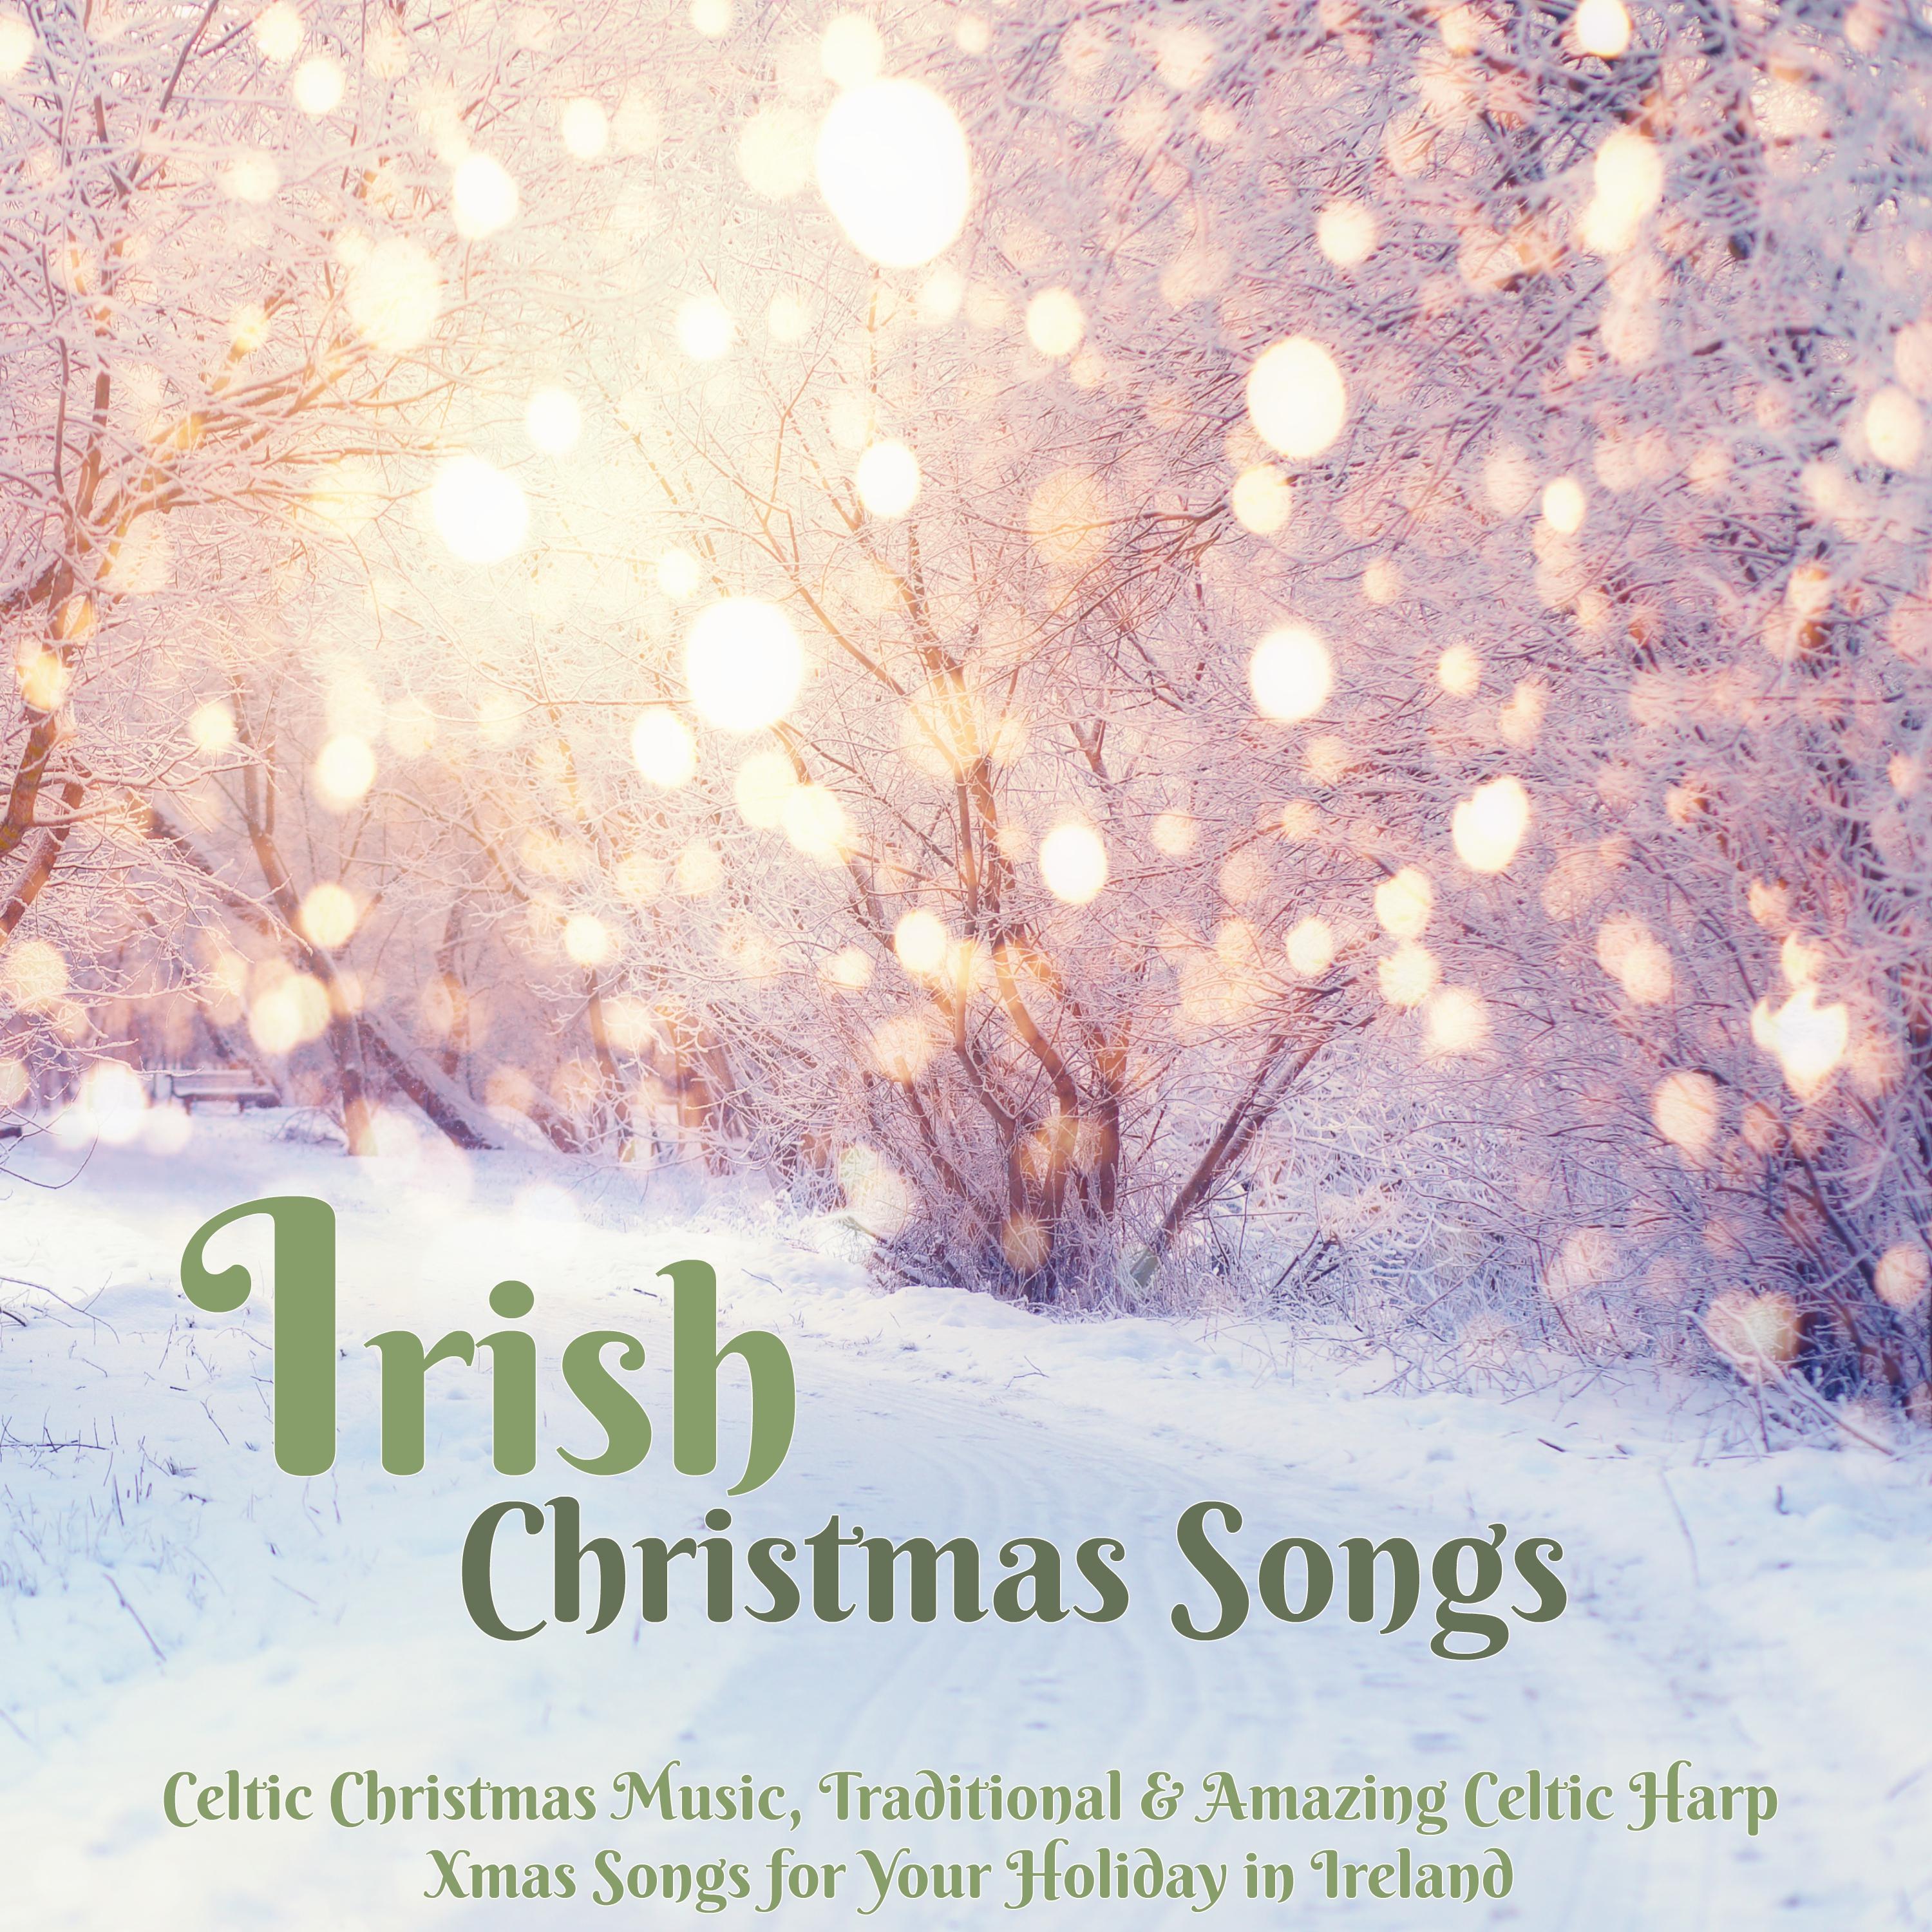 Irish Christmas Songs – Celtic Christmas Music, Traditional & Amazing Celtic Harp Xmas Songs for Your Holiday in Ireland